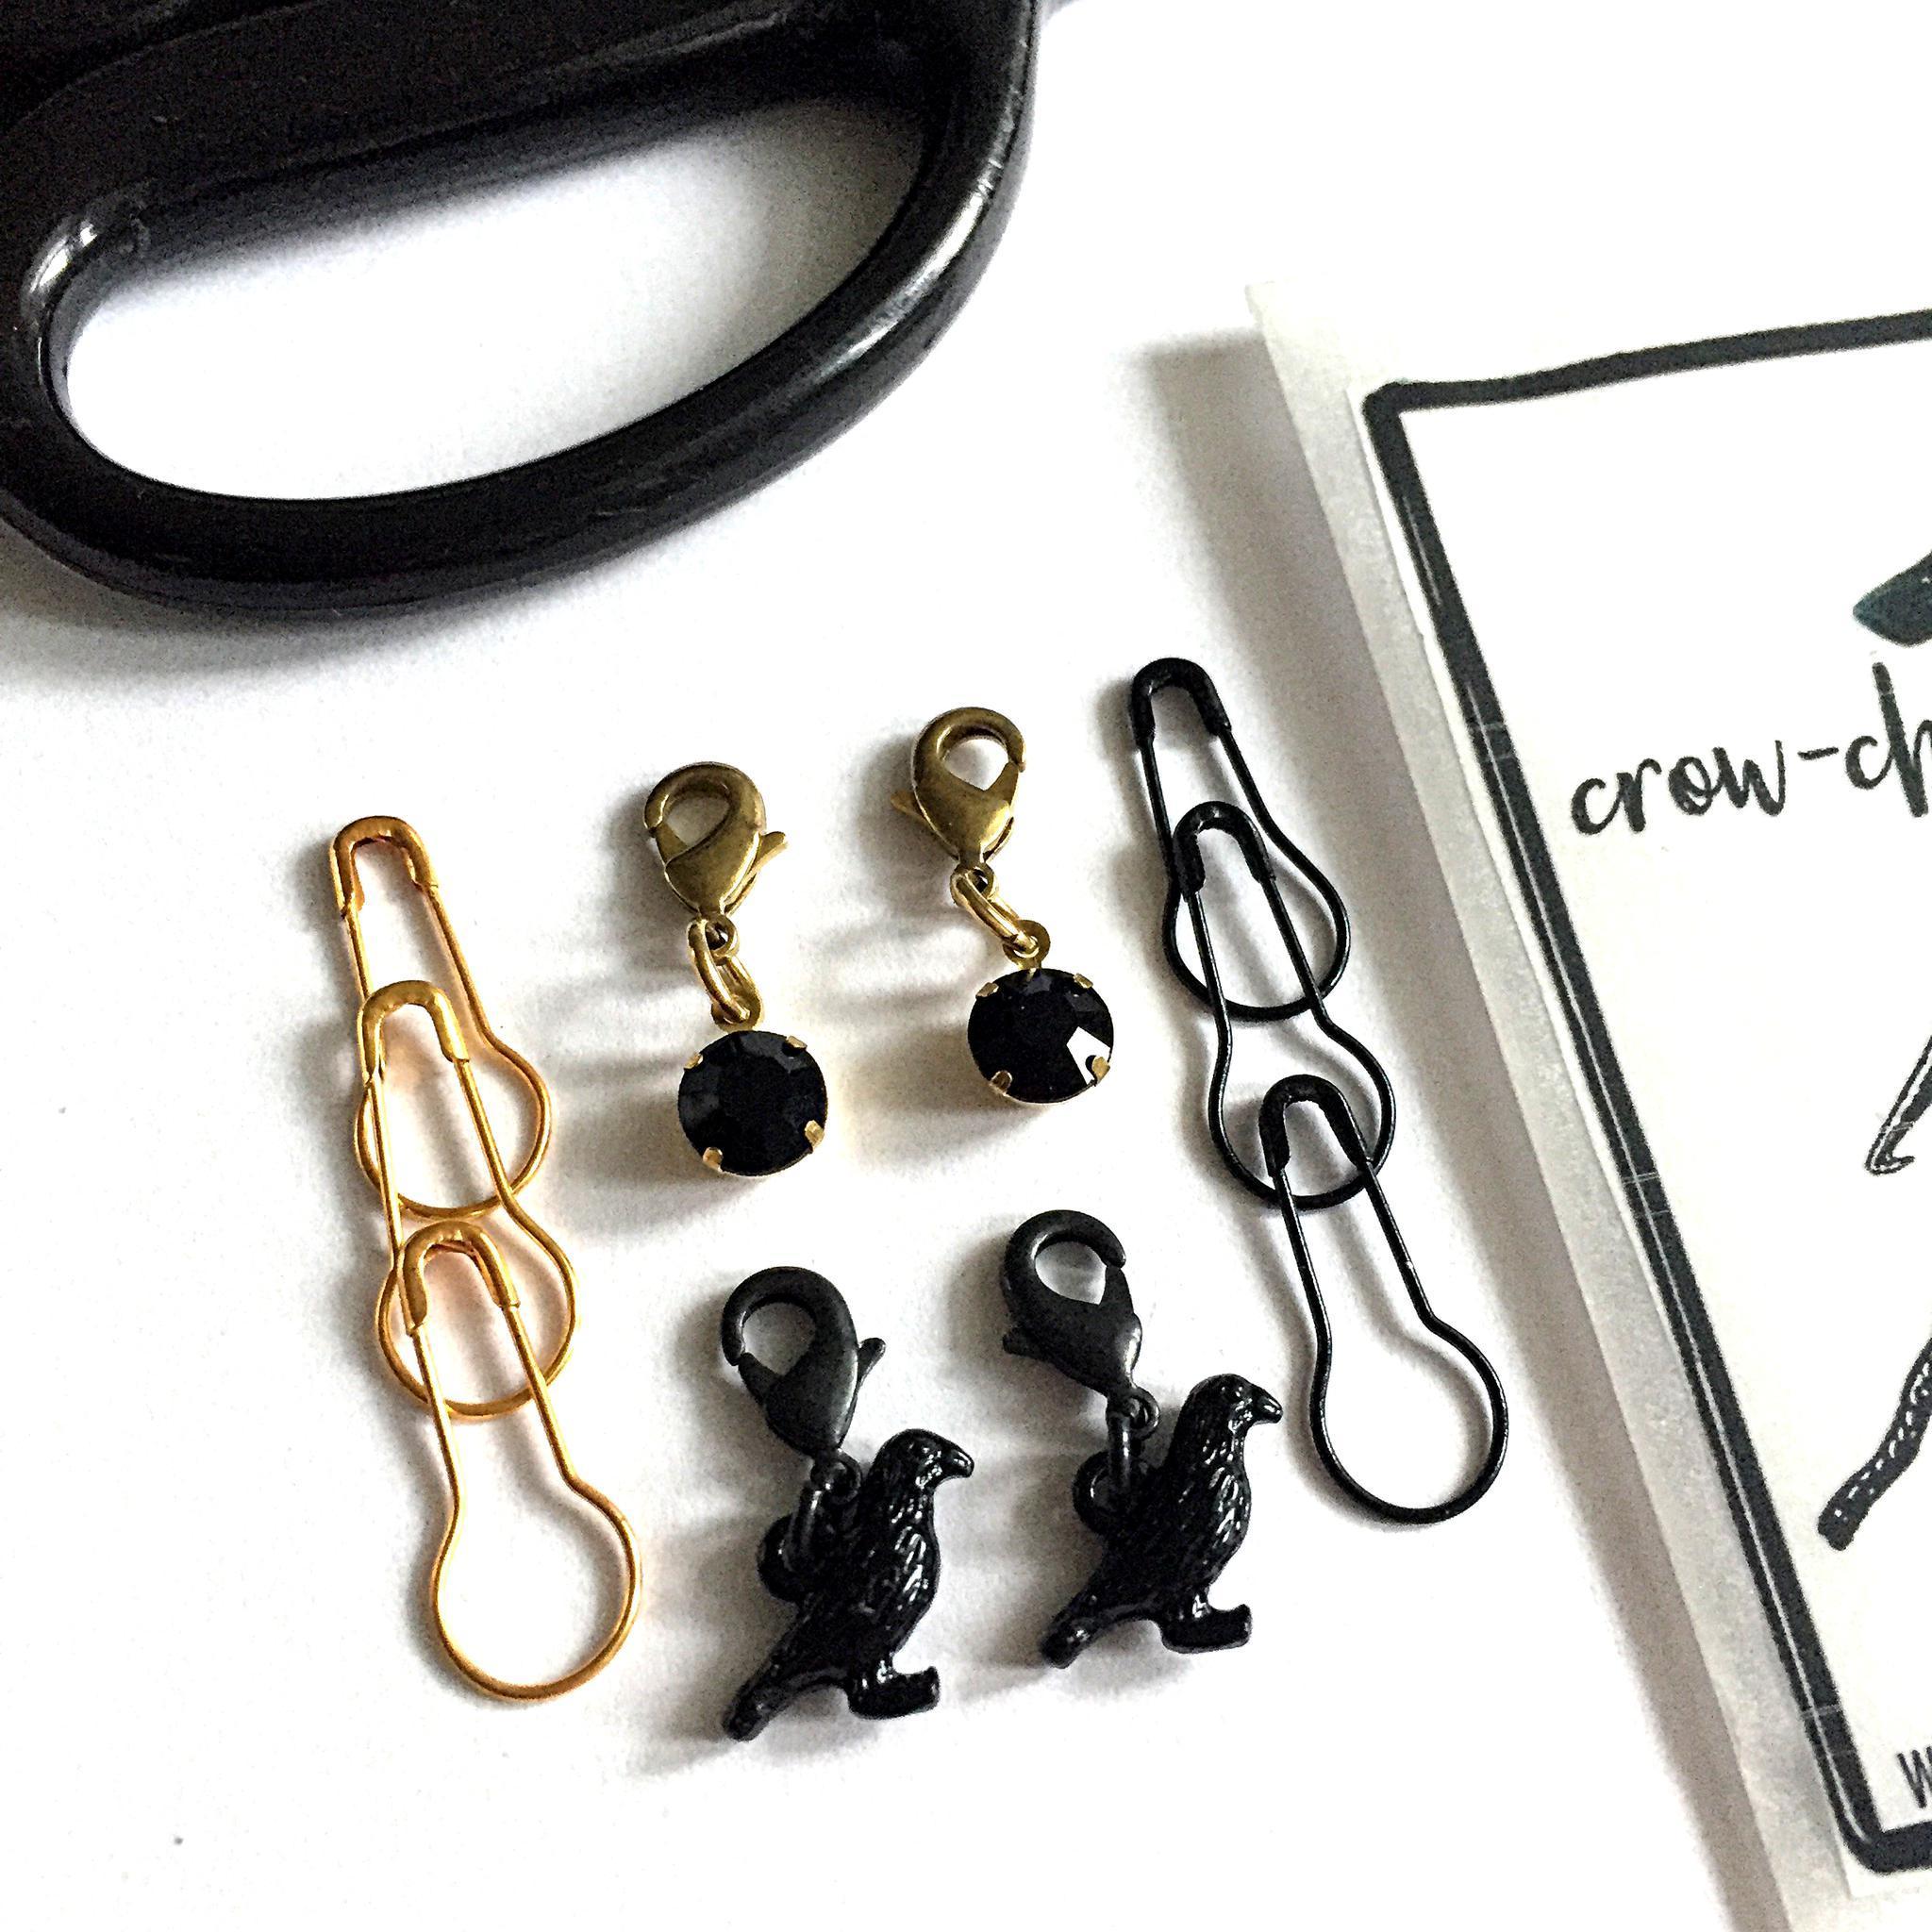 Crow-chet Crochet Stitch Marker Pack – gather here online